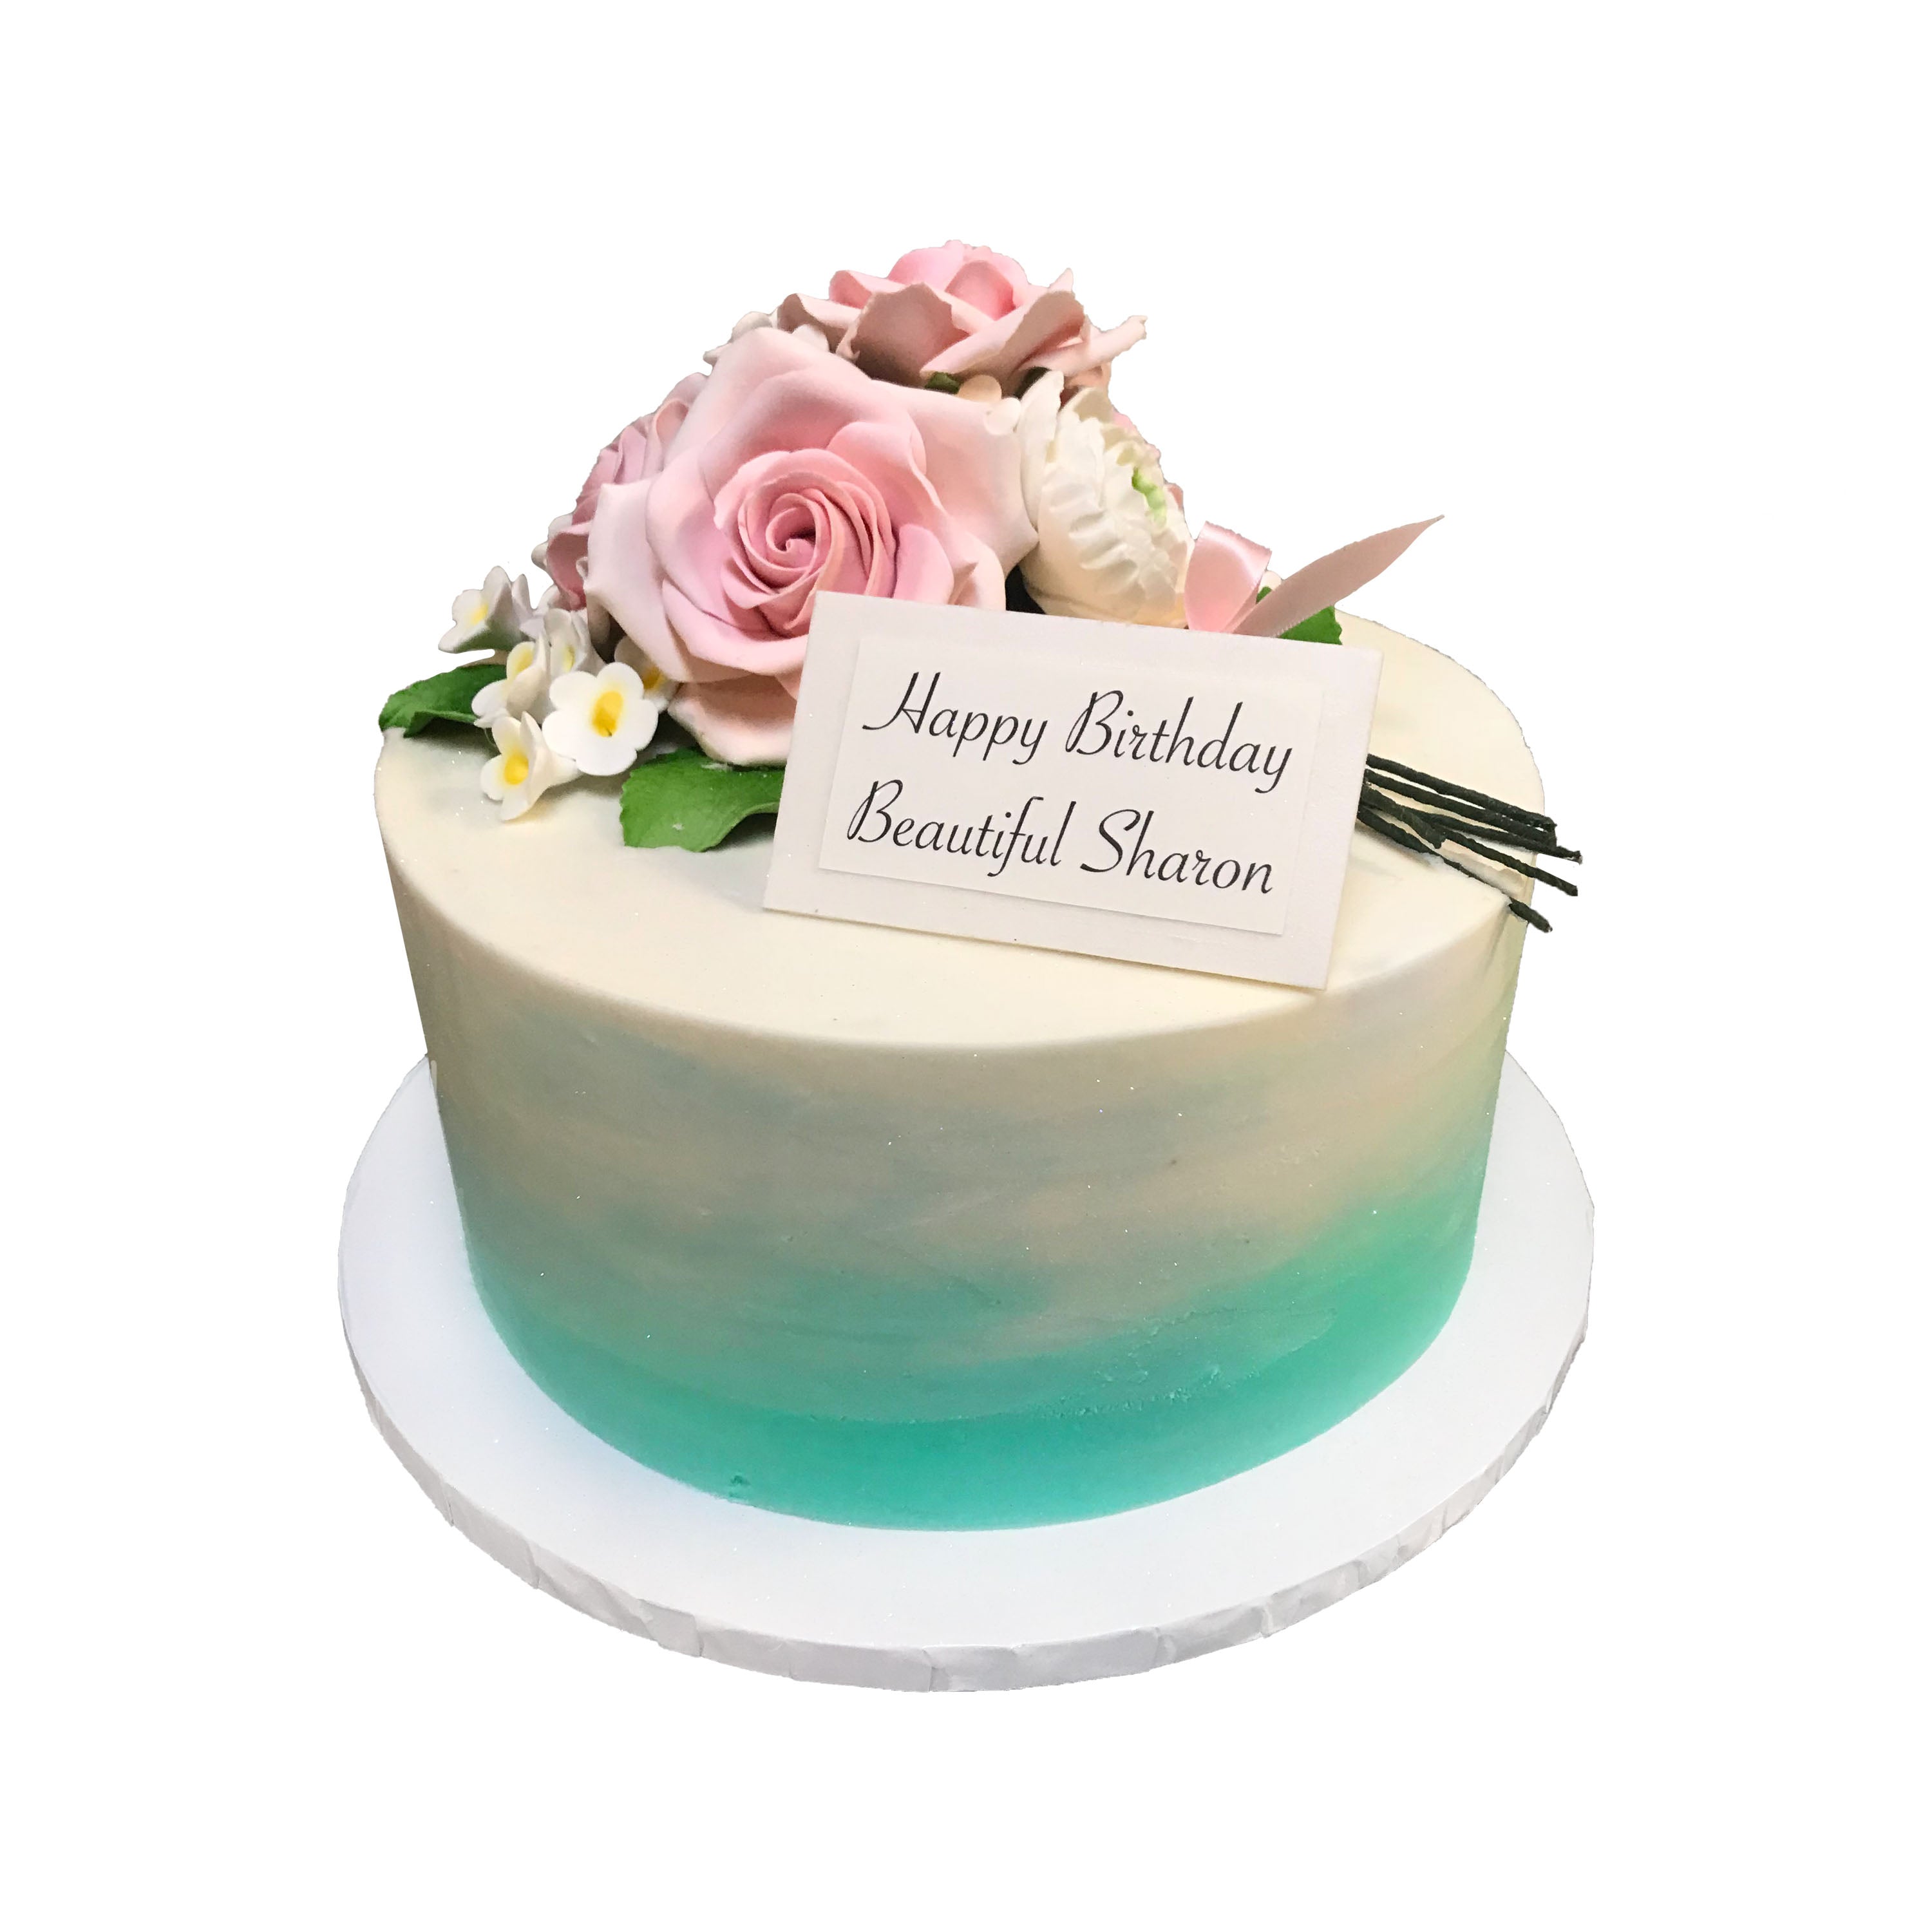 Beautiful Birthday Flowers, Cakes & Gifts | Free Delivery - BloomThis